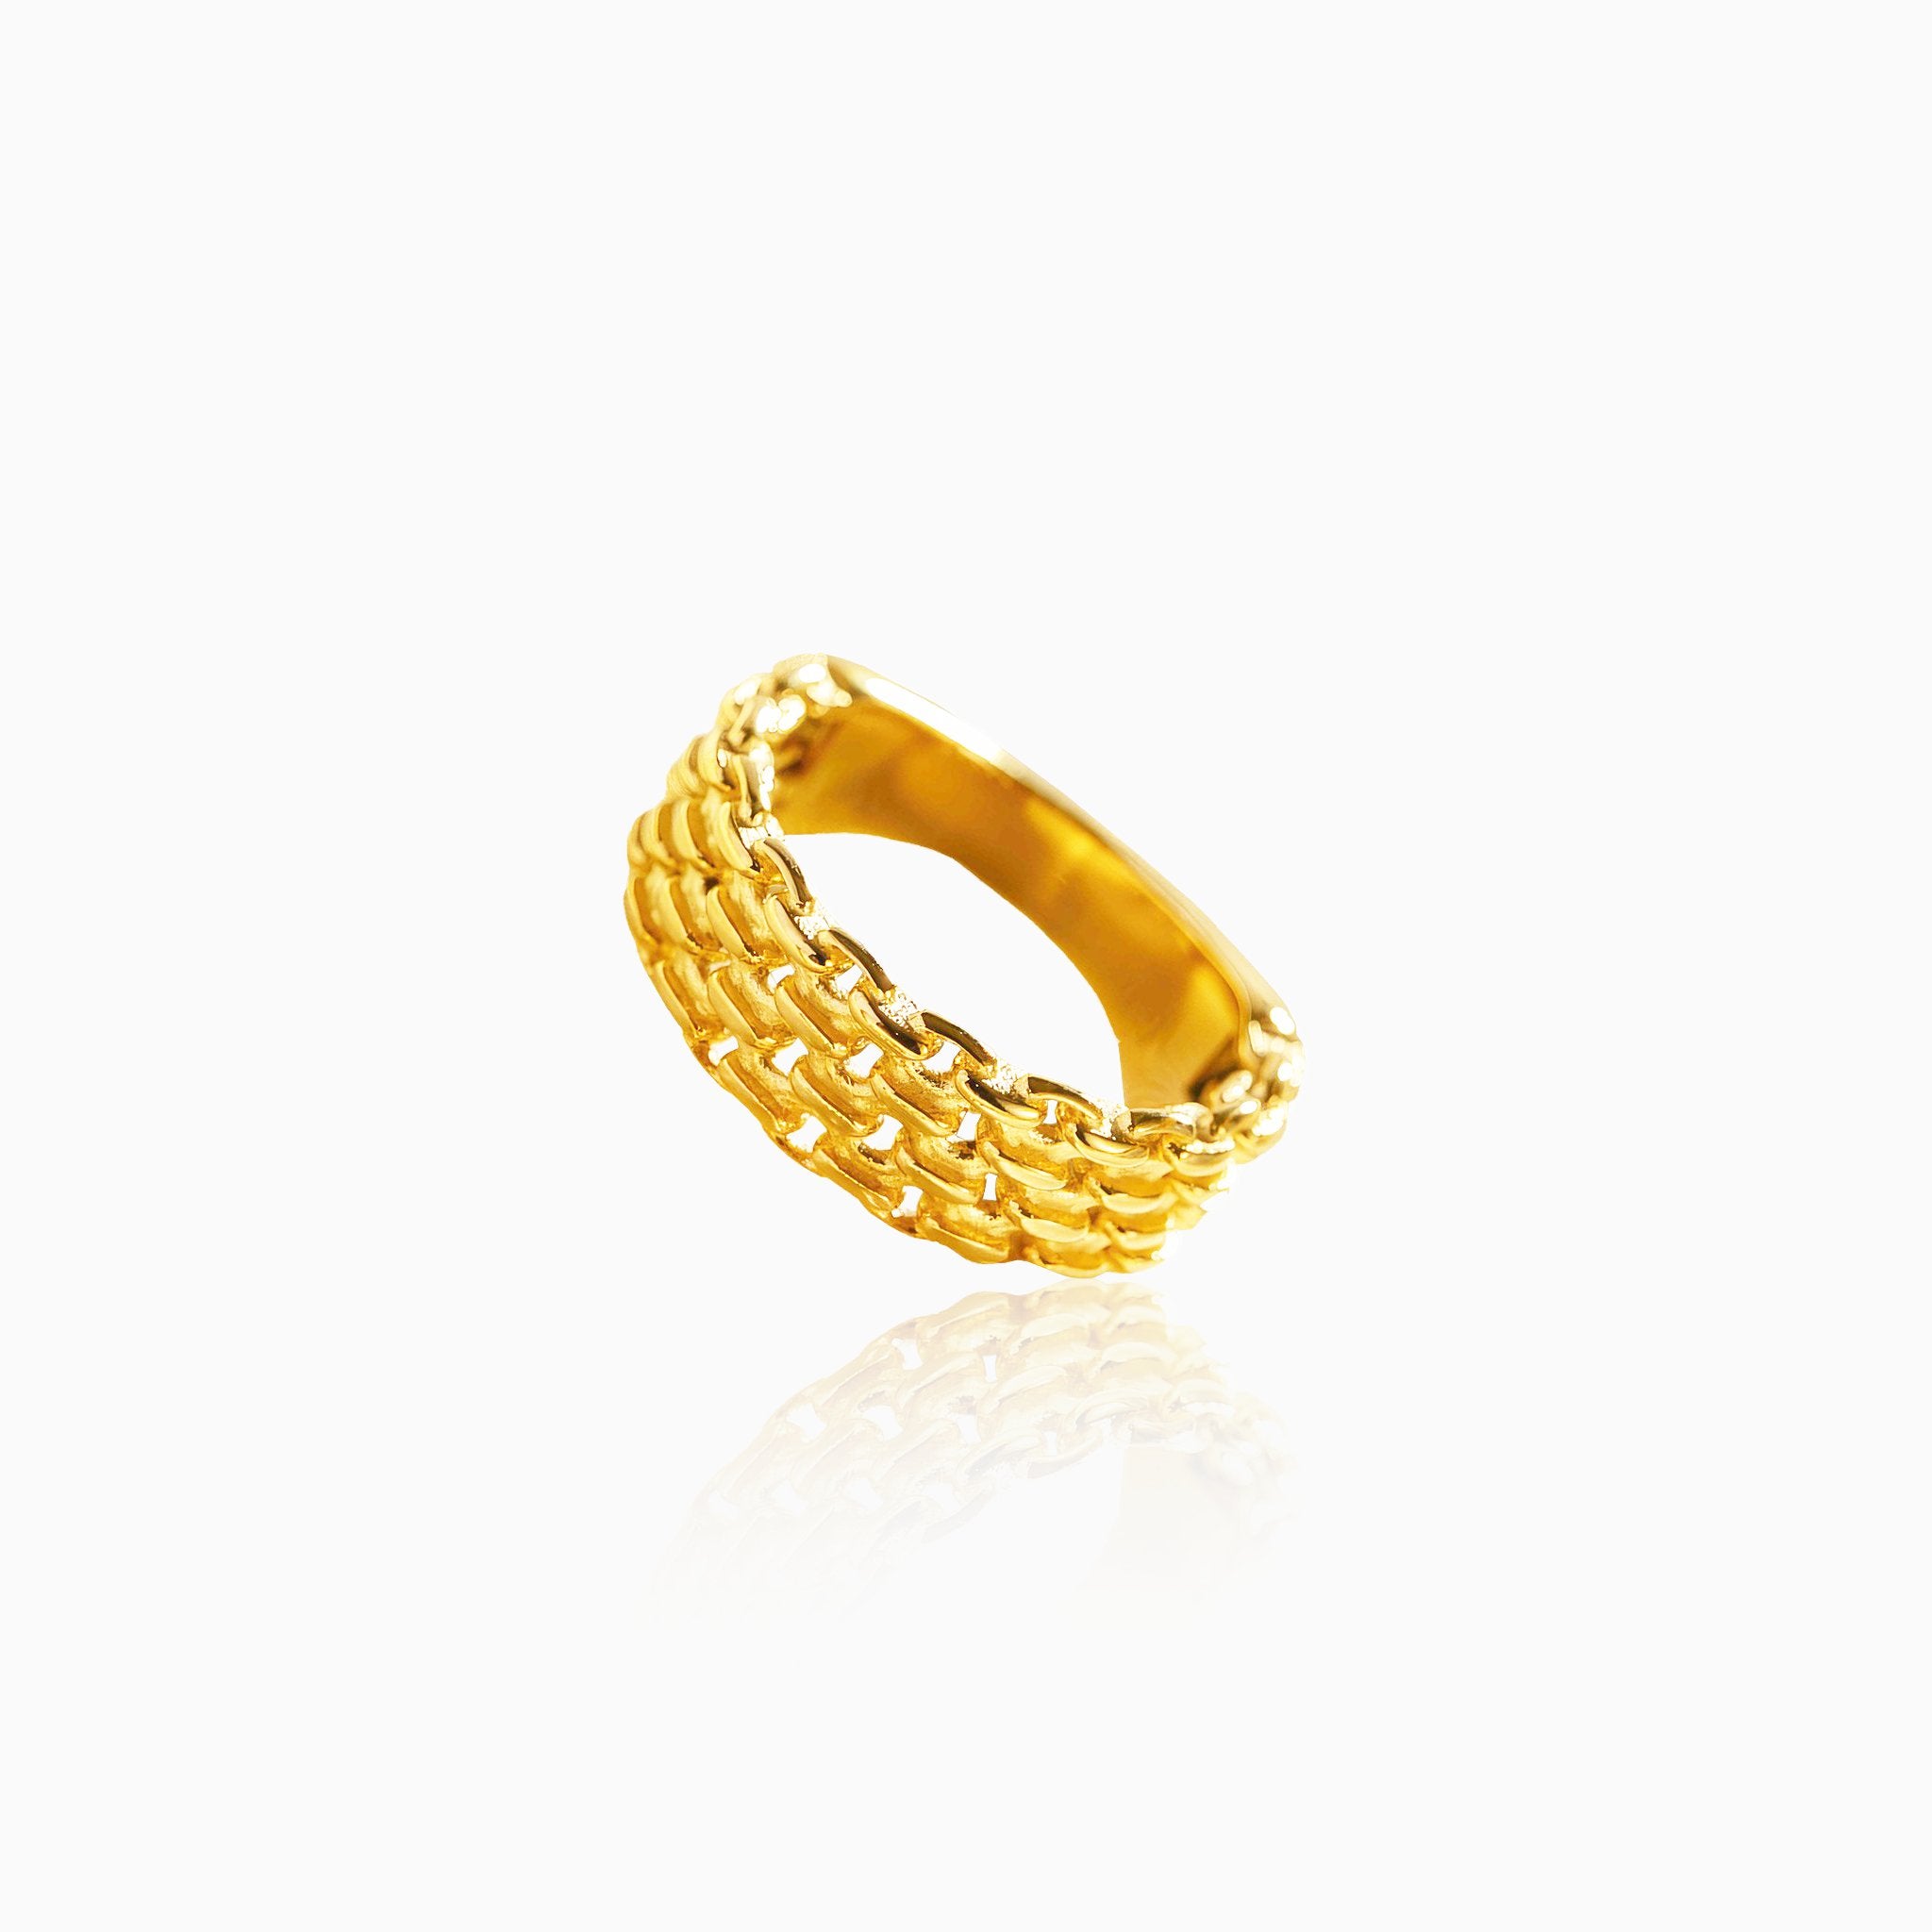 Hollow Braided Versatile Ring - Nobbier - Ring - 18K Gold And Titanium PVD Coated Jewelry